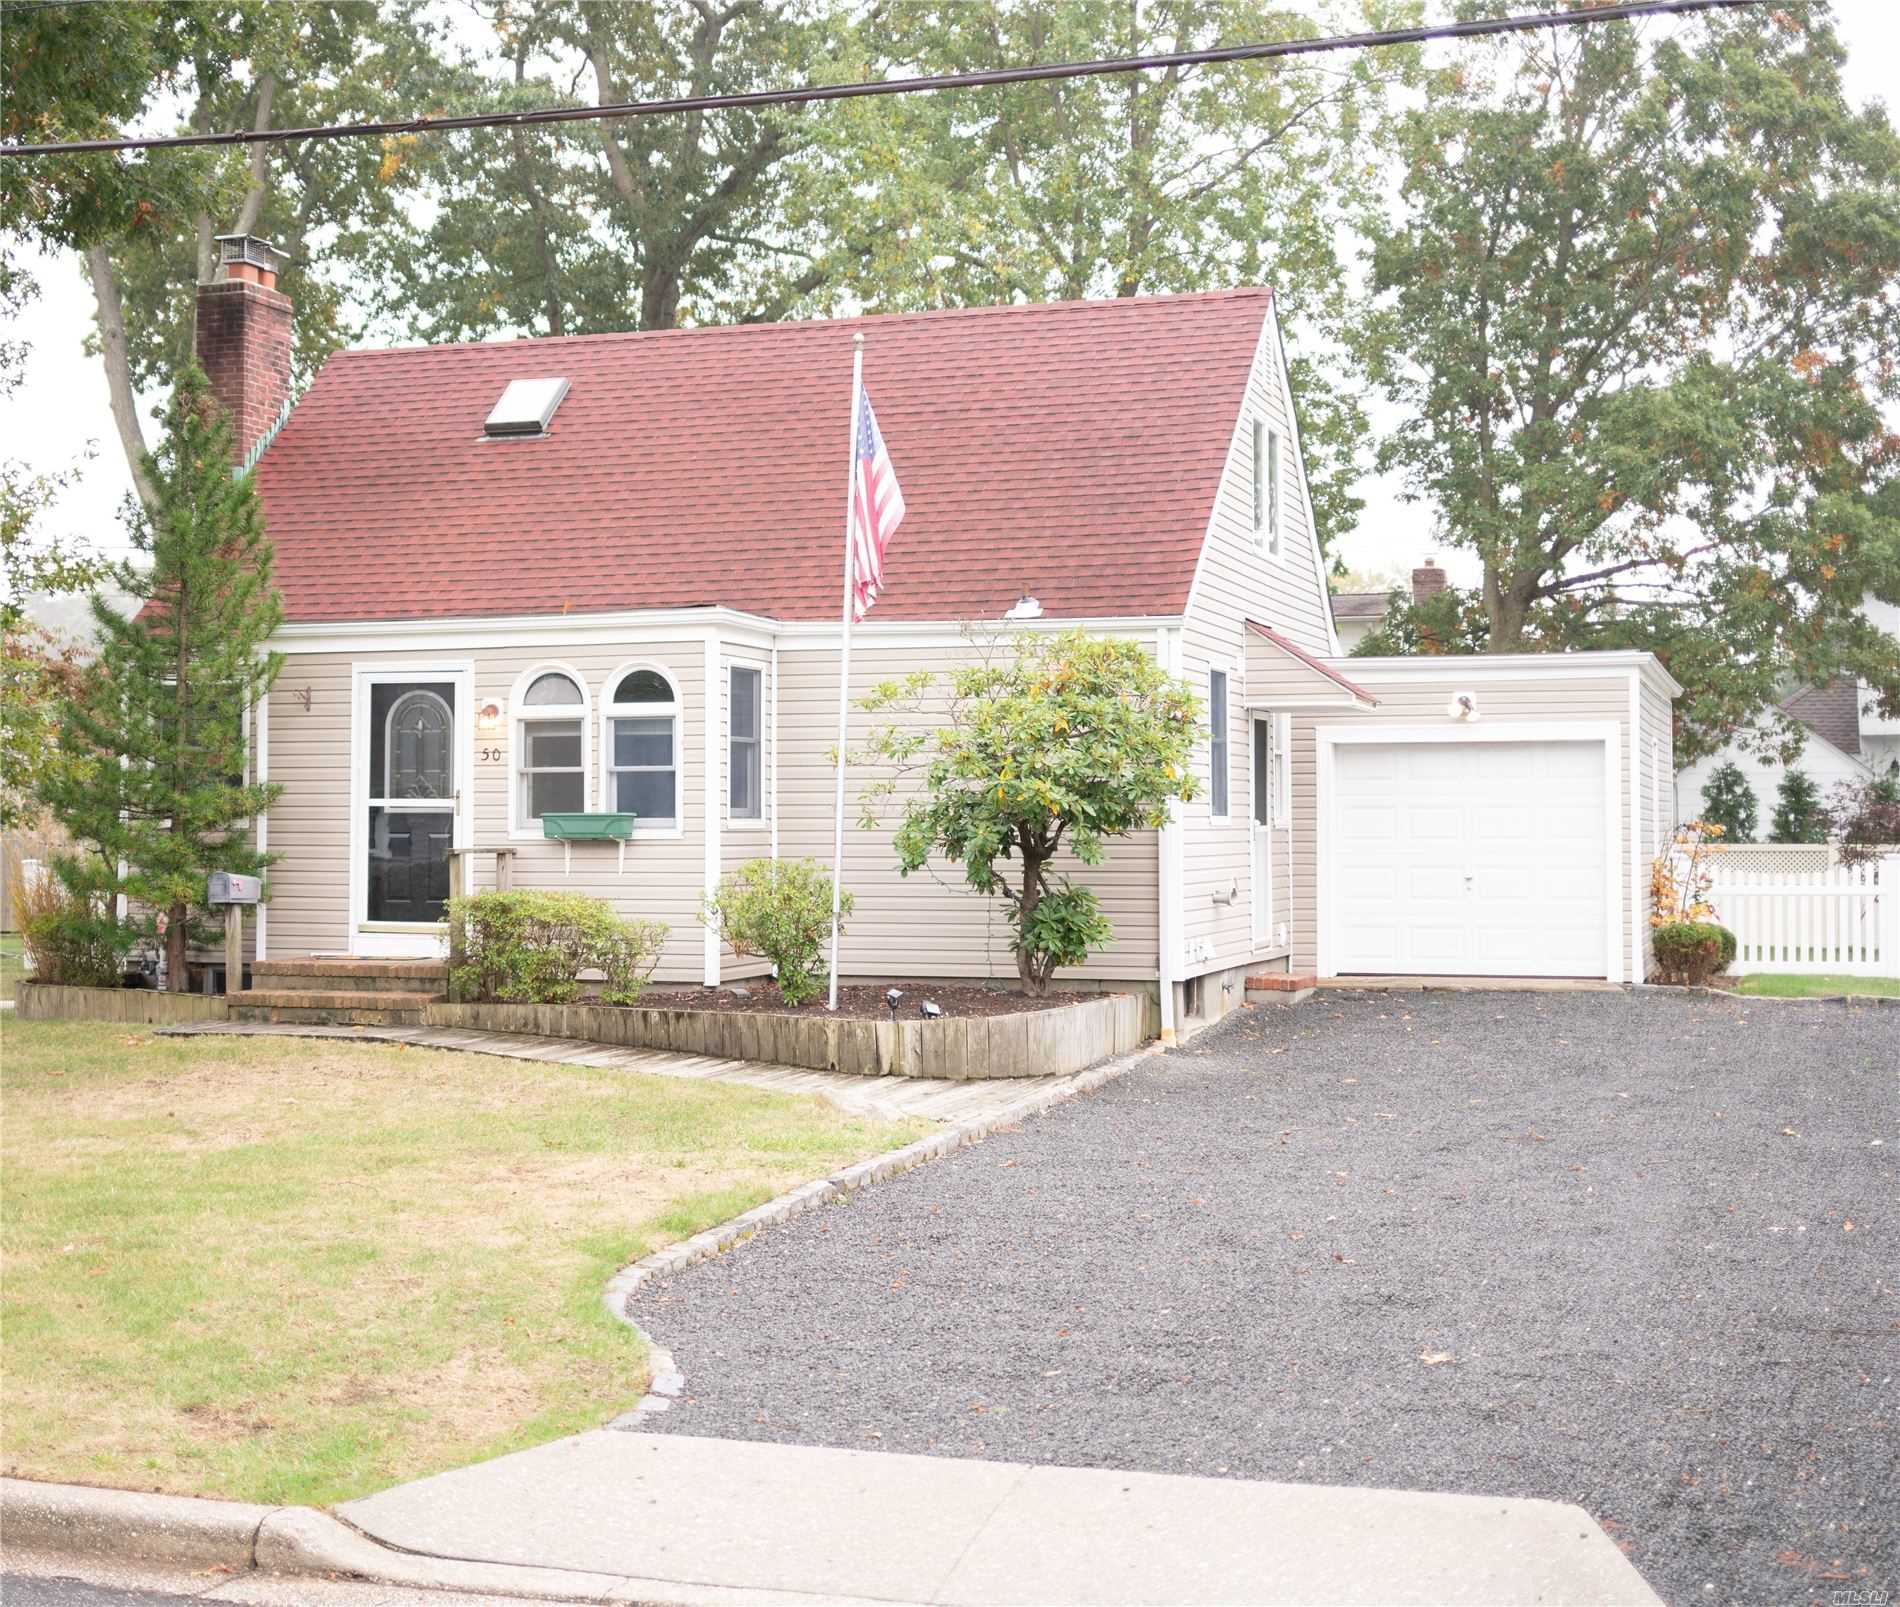 Just in Time for Fall.... Charming 3 Bedroom, 2 Bath Cape in the heart of Massapequa Woods! Perfectly set on a Quiet Mid-Block Location. Updated Eat in Kitchen and Bathrooms. Lovely Living Room w/Fireplace. Hardwood floors throughout. All on an 80 x 100 Lot! Close to Shopping, Schools, and Train. SD #23.